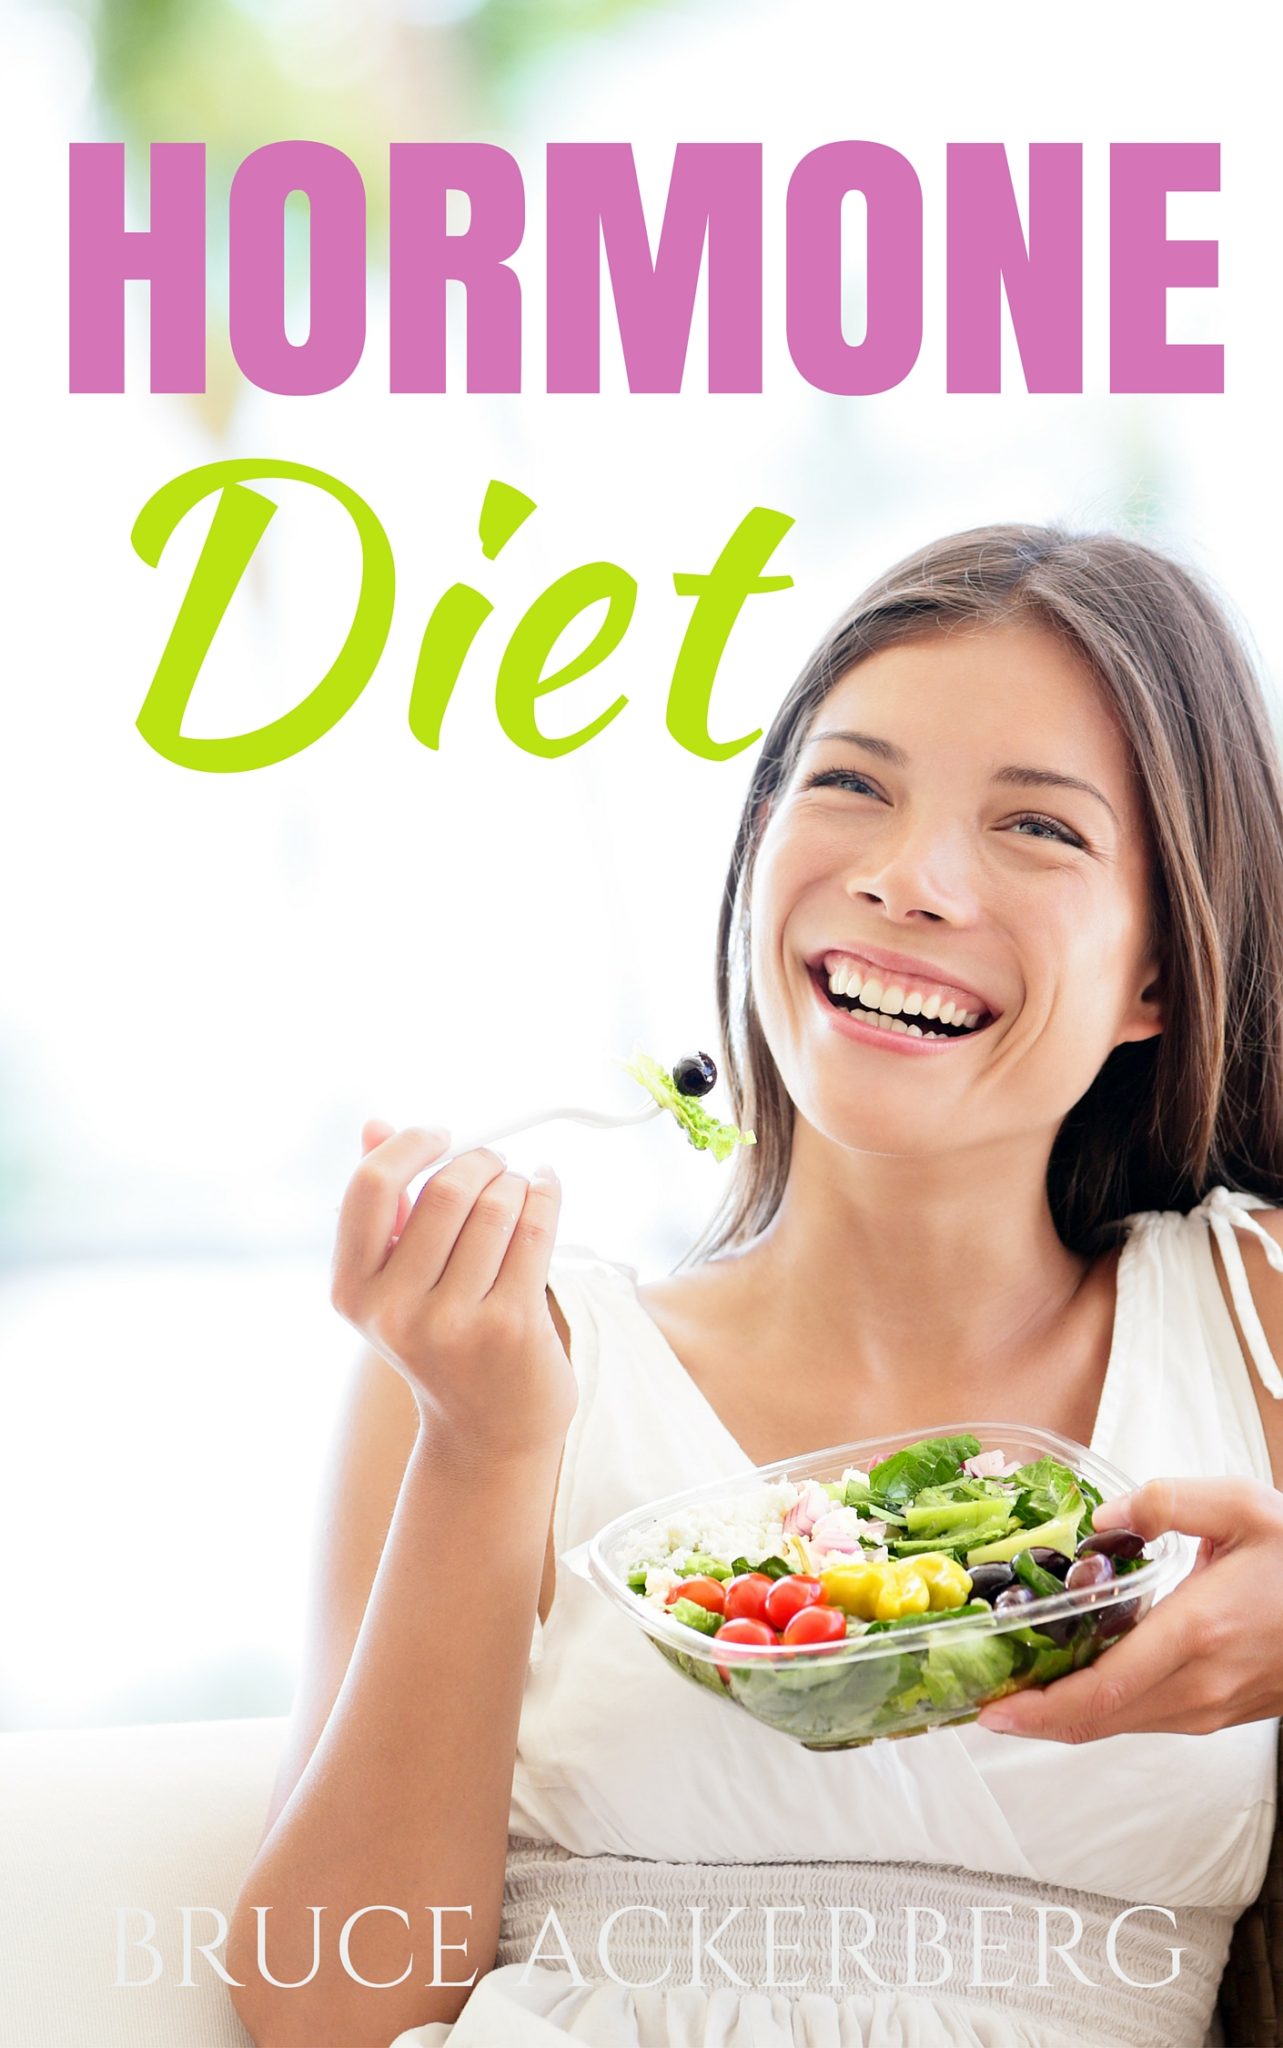 FREE: Hormone Diet: A Step by Step Guide for Beginners, Top Recipes Hormone Diet Recipes by Bruce Ackerberg